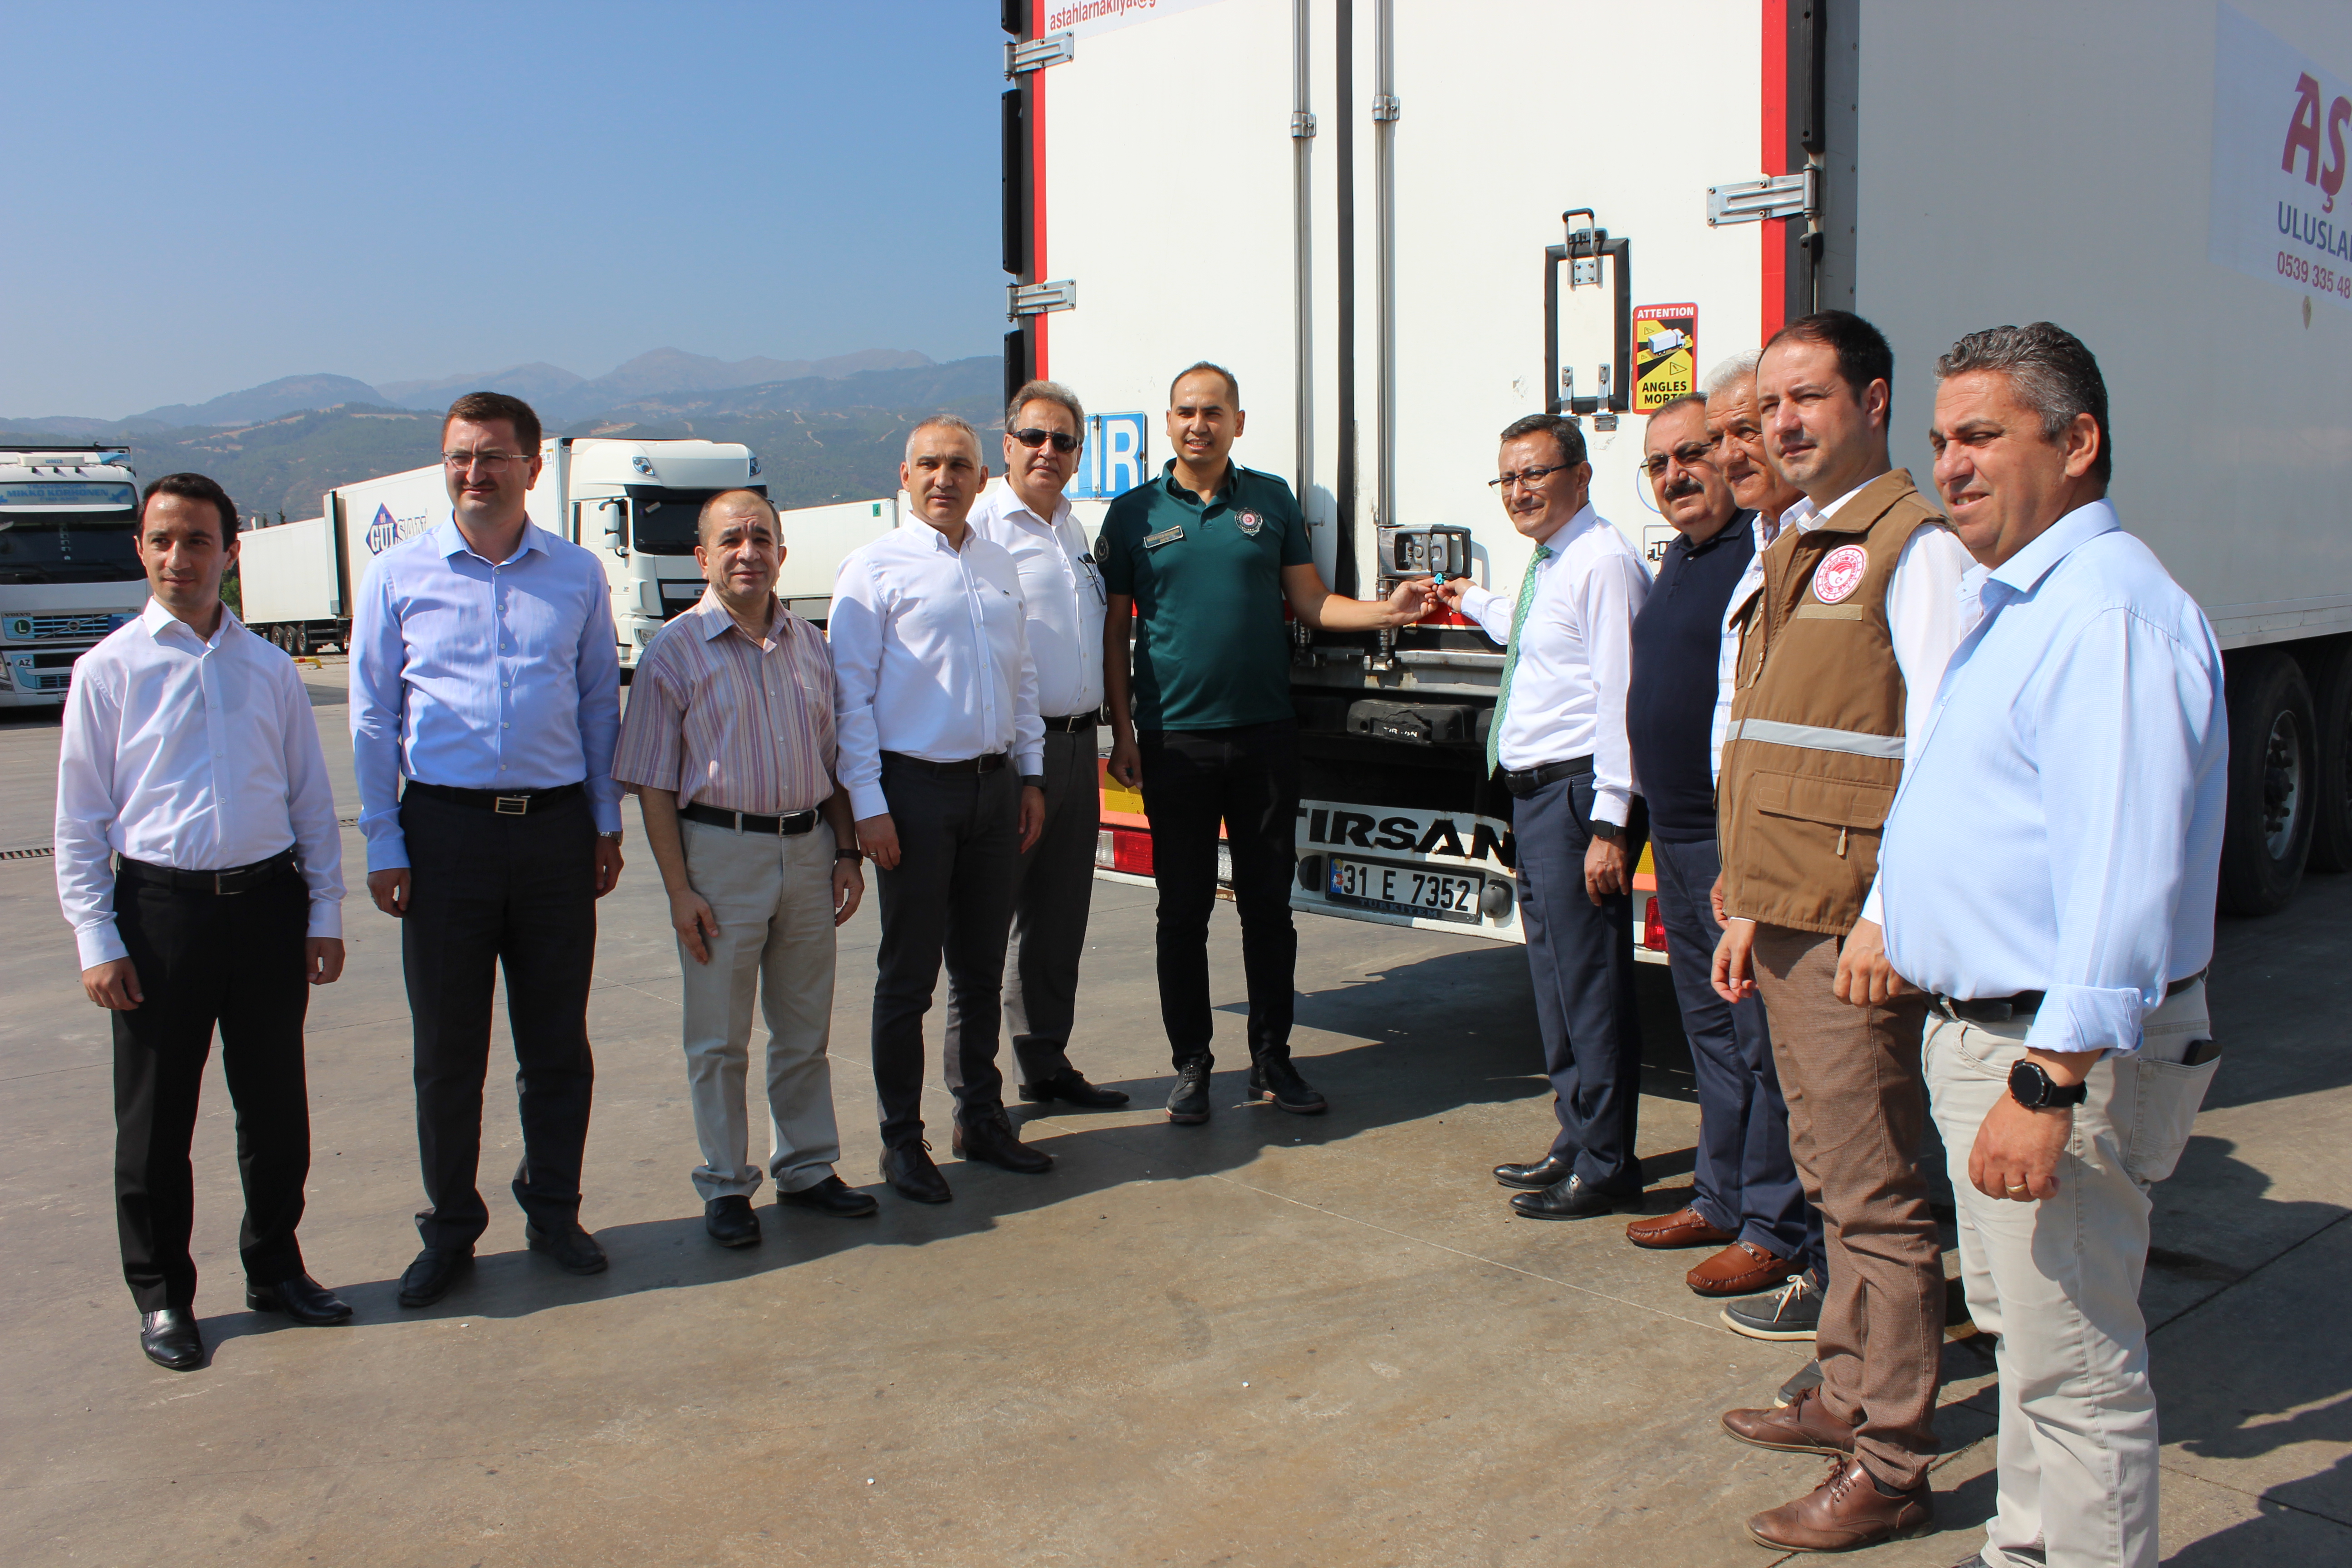 Harvesting and exporting of world-famous seedless Sultaniye grapes from the Alaehir district of Manisa, which is called the 'Capital of Grapes', has started.